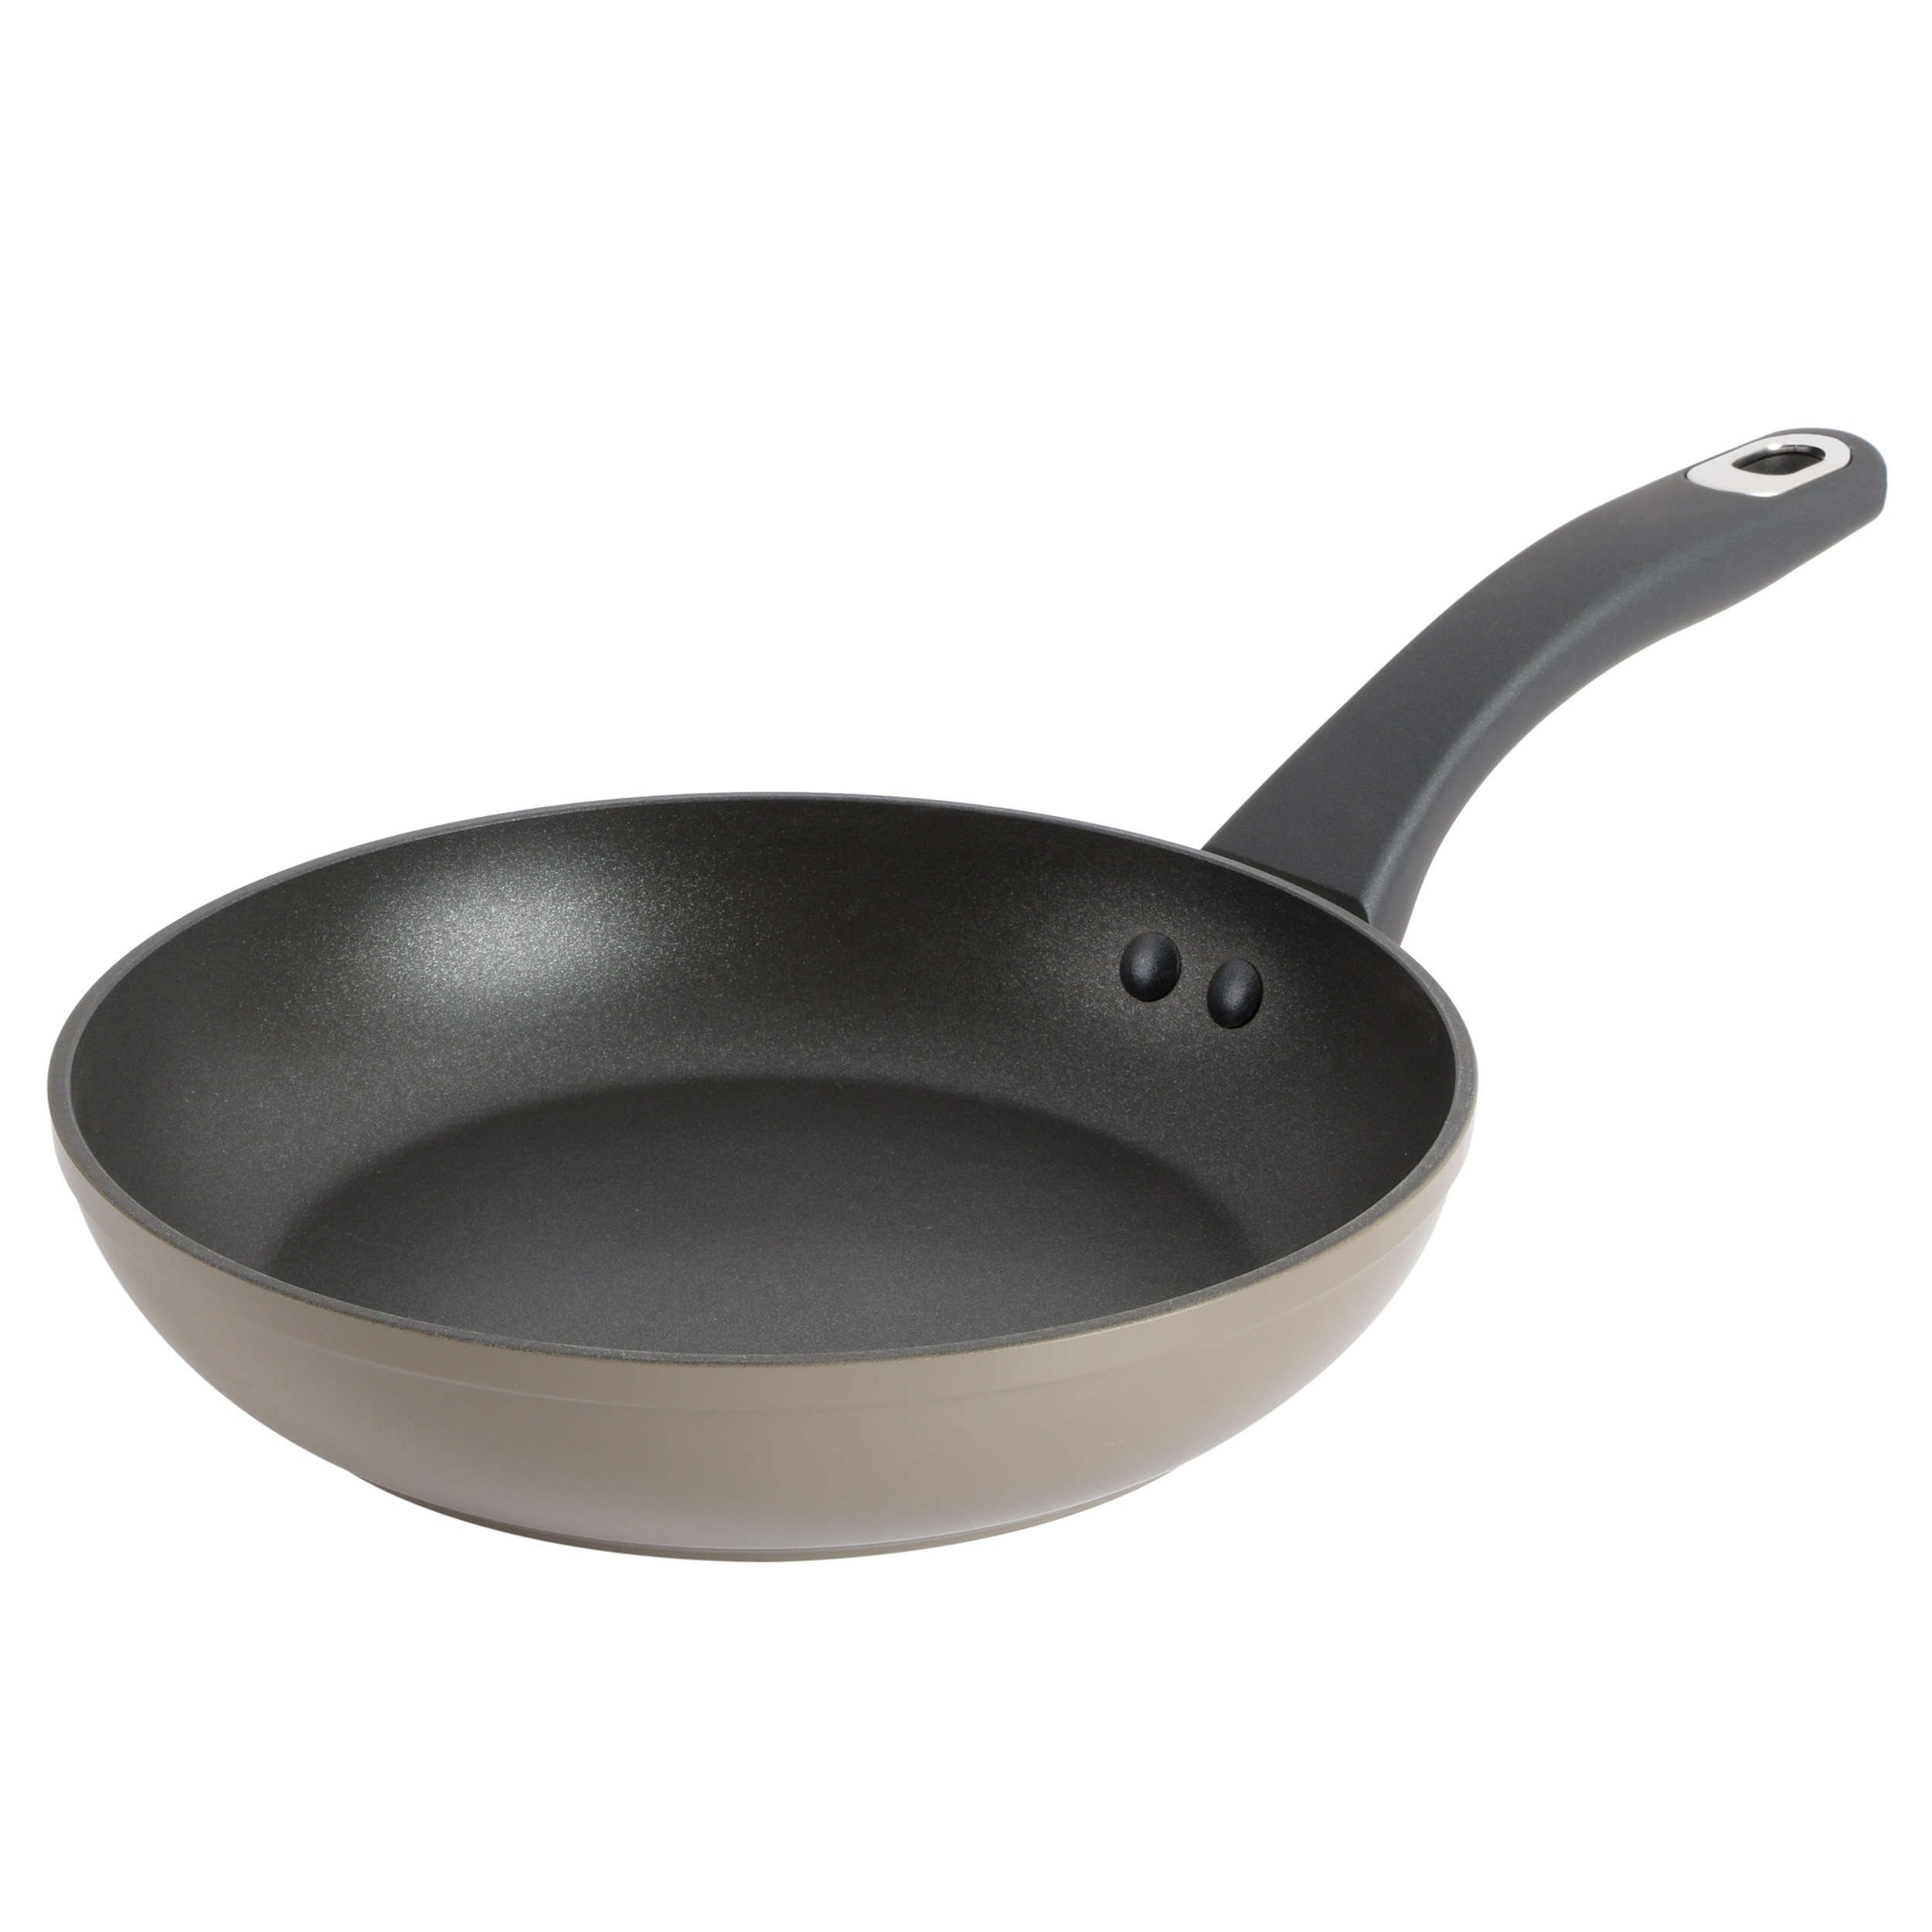 Goodful 2-Piece 10 and 12 Hammered Fry Pan Set 